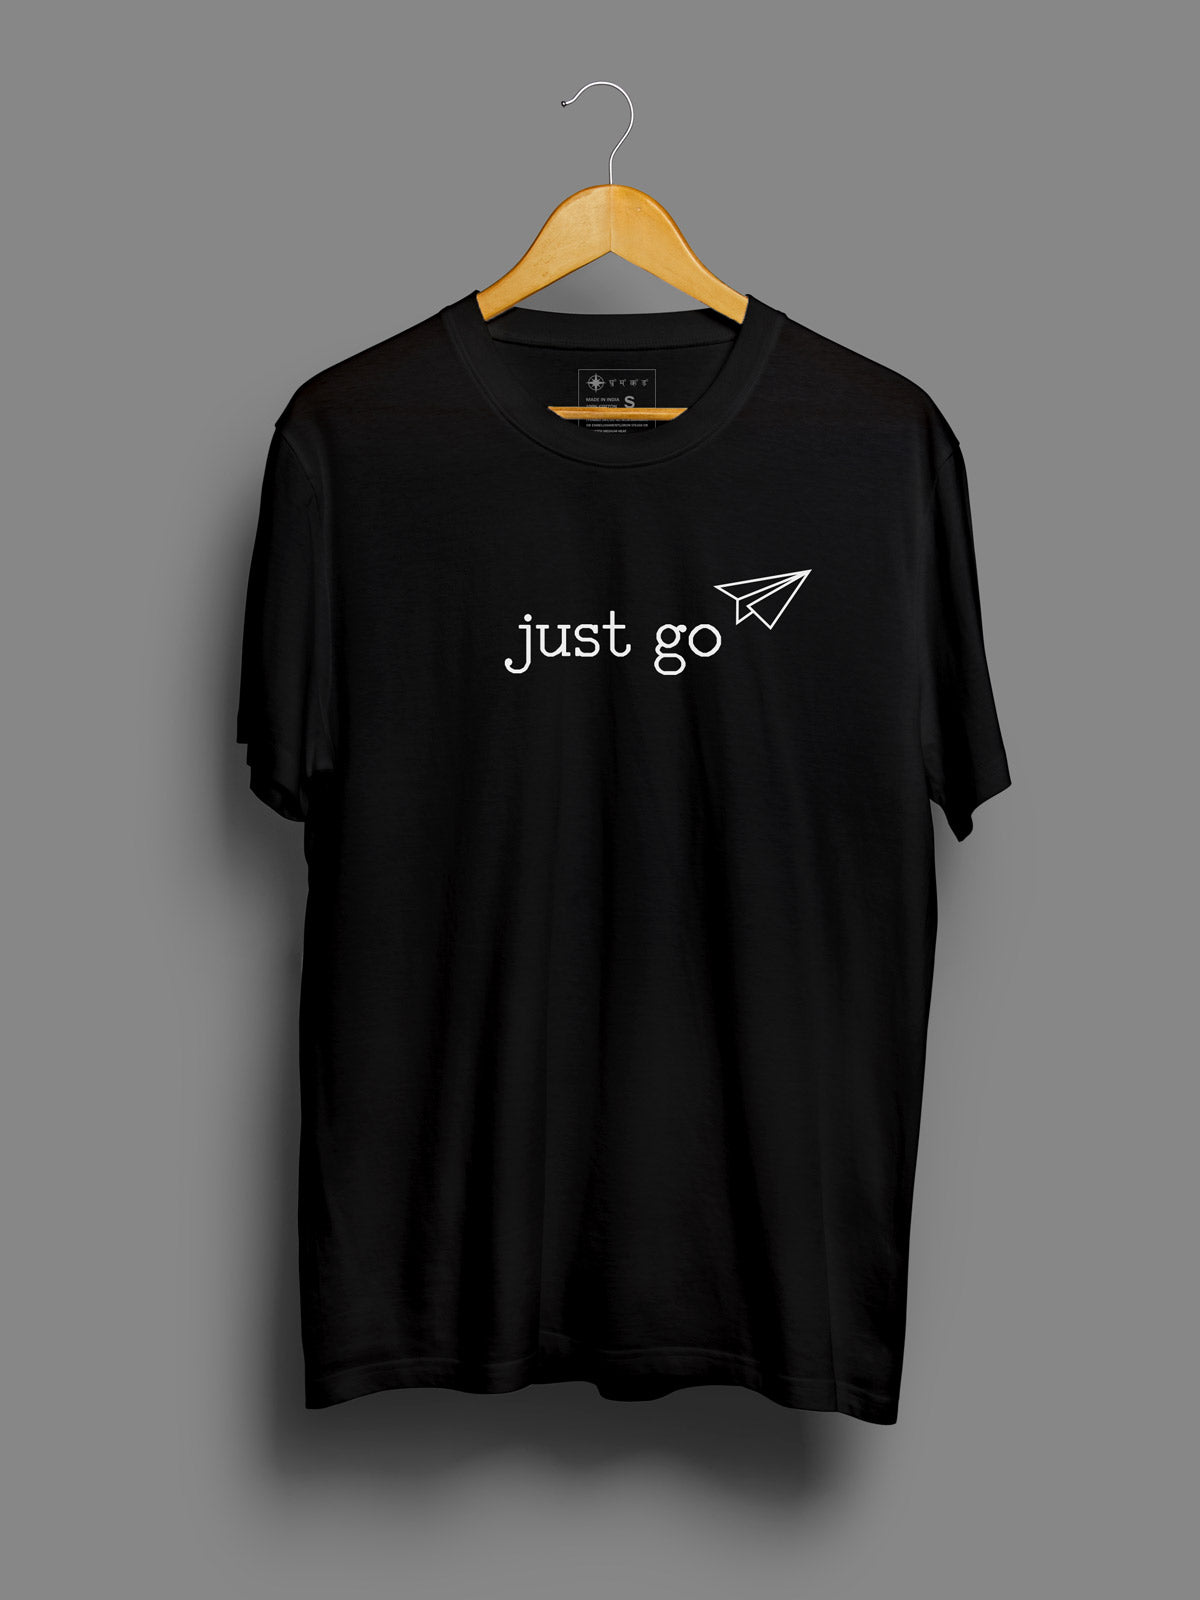 Just-go-printed-t-shirt-for-men by Ghumakkad